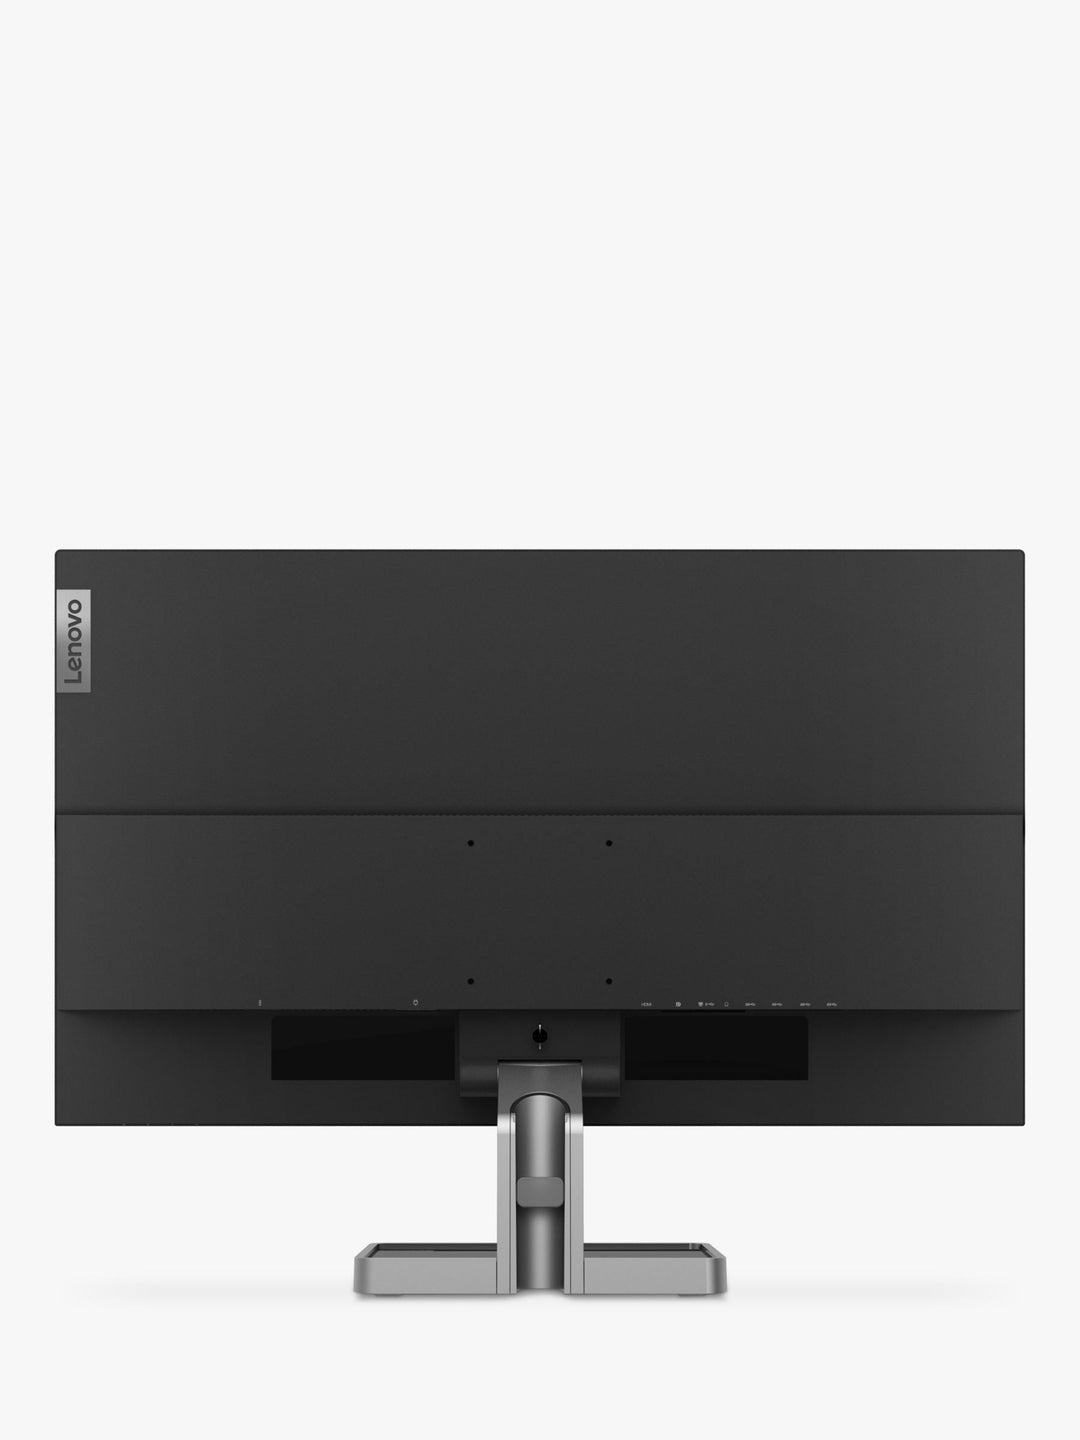 Lenovo L32p-30 4K UHD Monitor 31.5" | Gaming | Ultrathin Bezel | 6.8KG | WLED Panel | Wide Viewing Angles